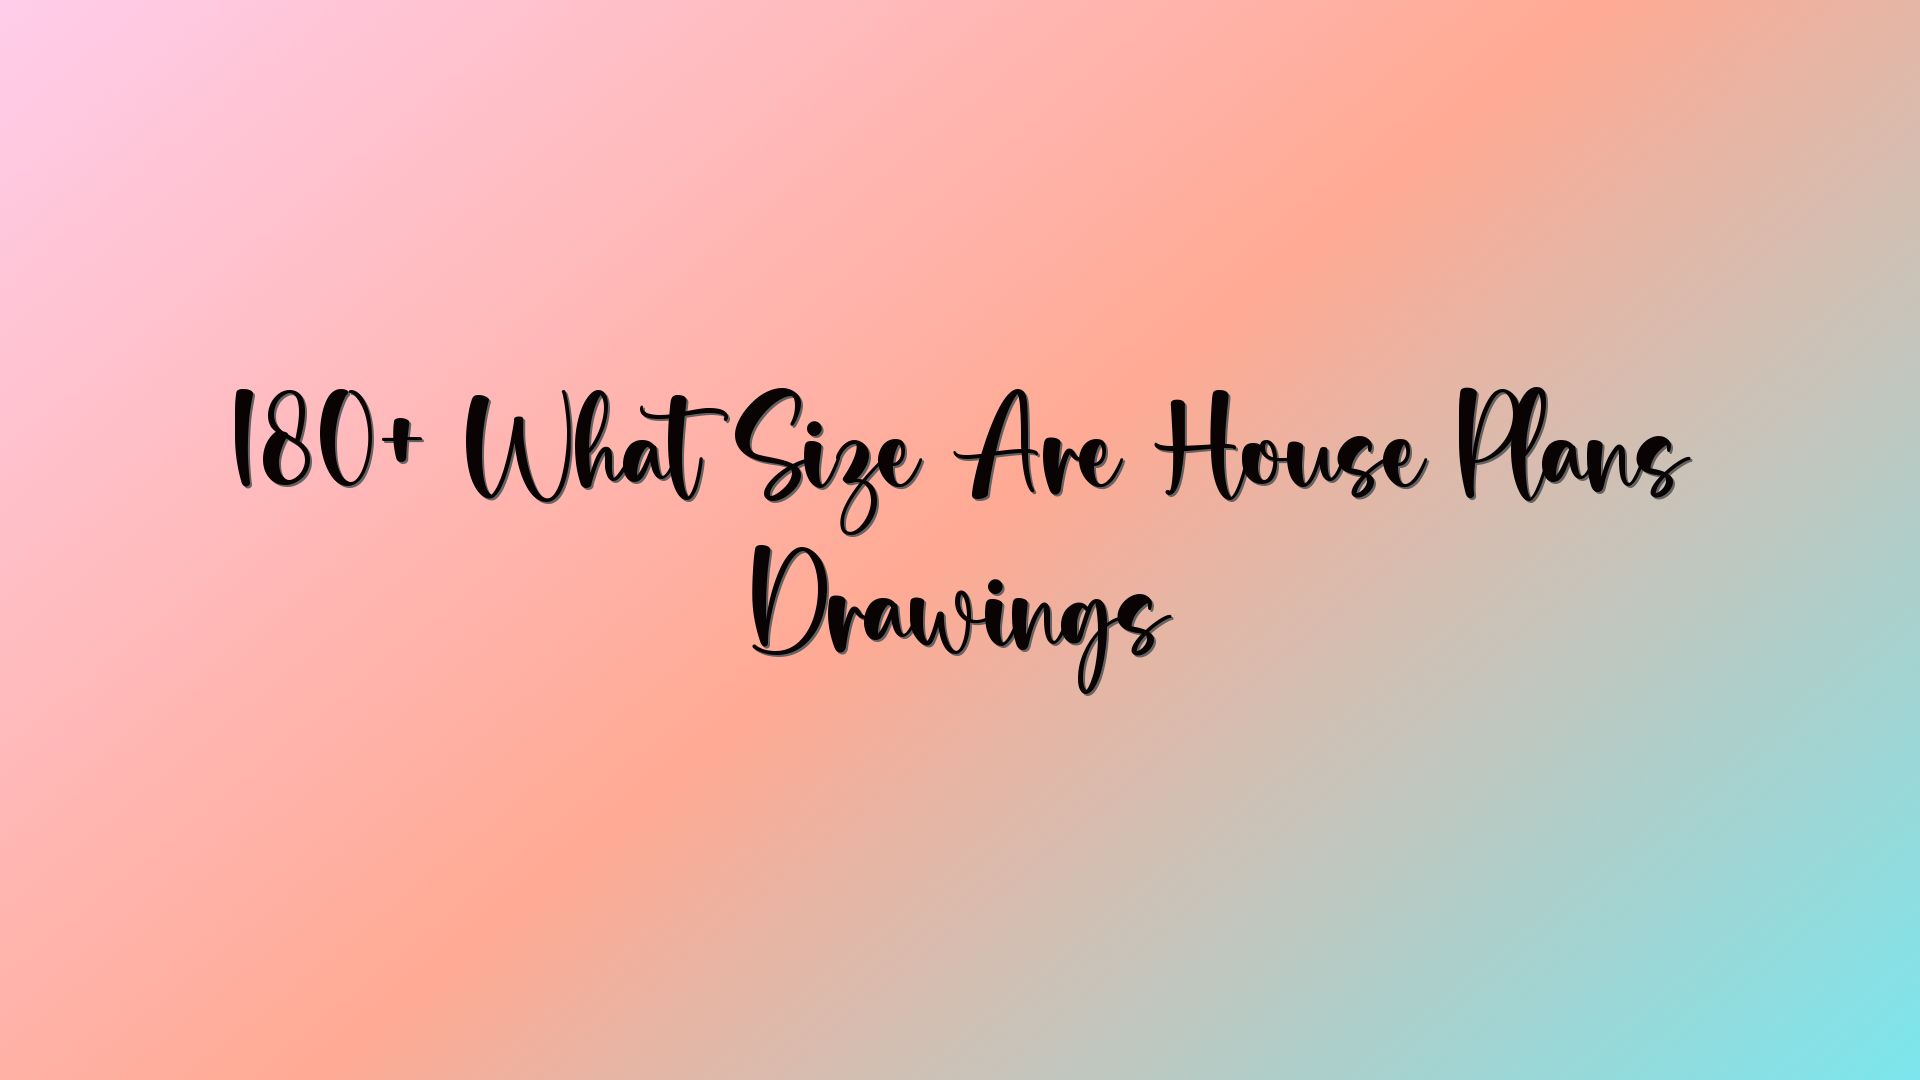 180+ What Size Are House Plans Drawings